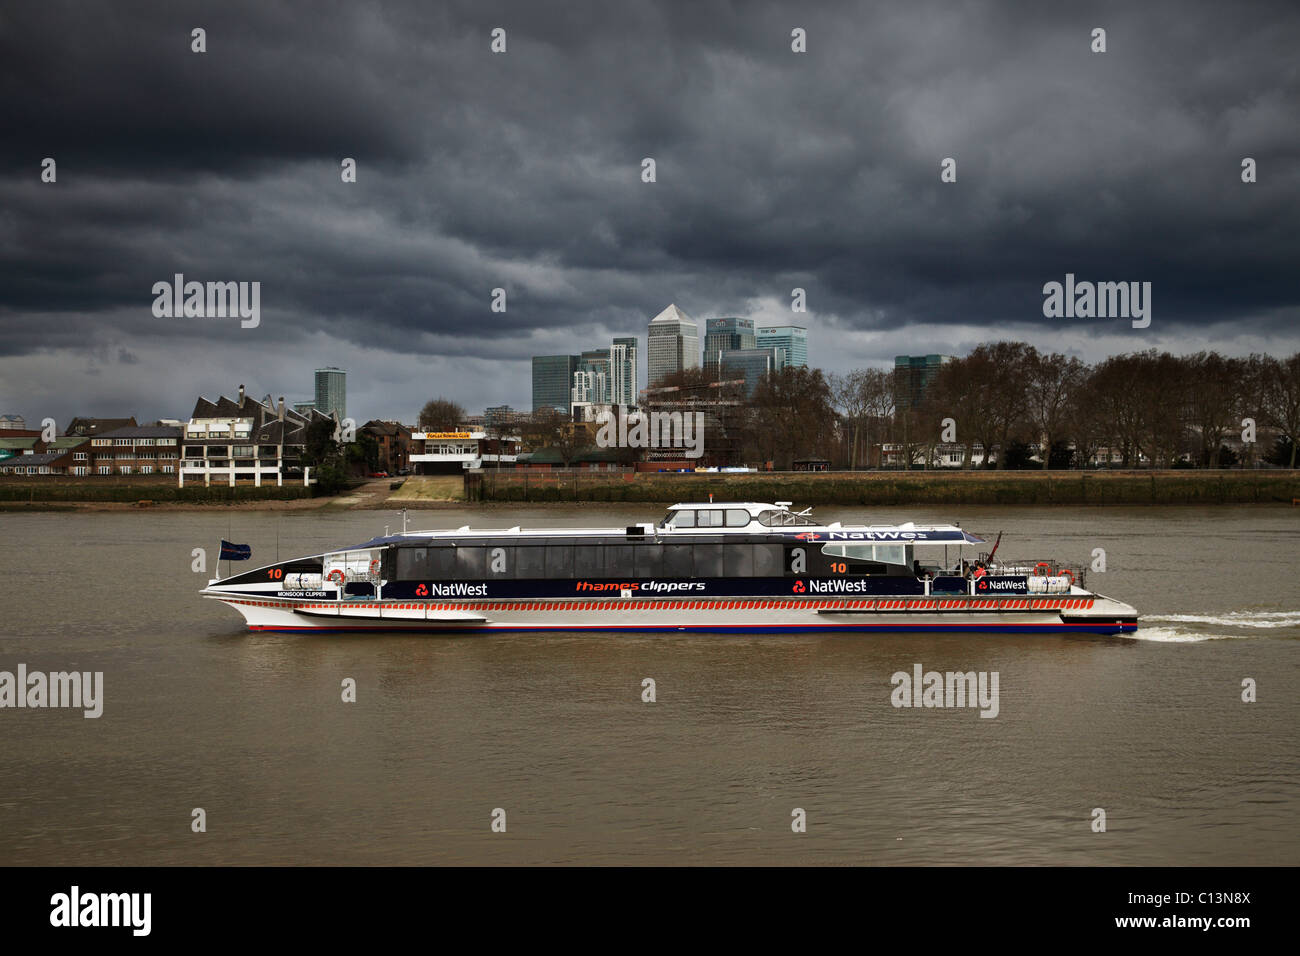 Thames Clipper in approaching storm. Stock Photo